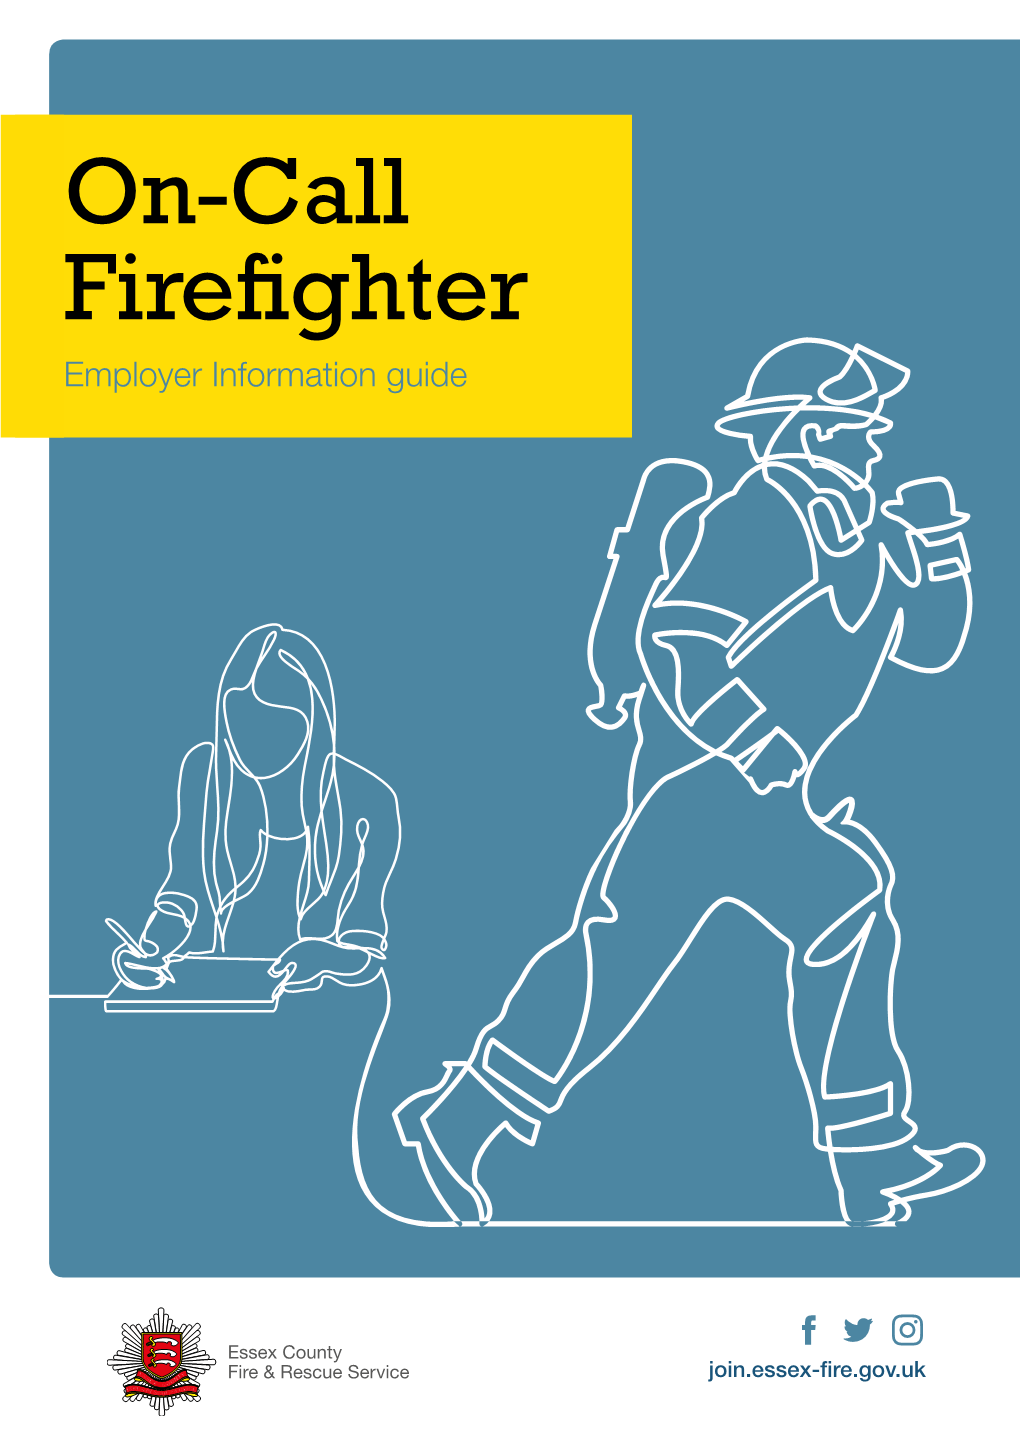 On-Call Firefighter Employer Information Guide